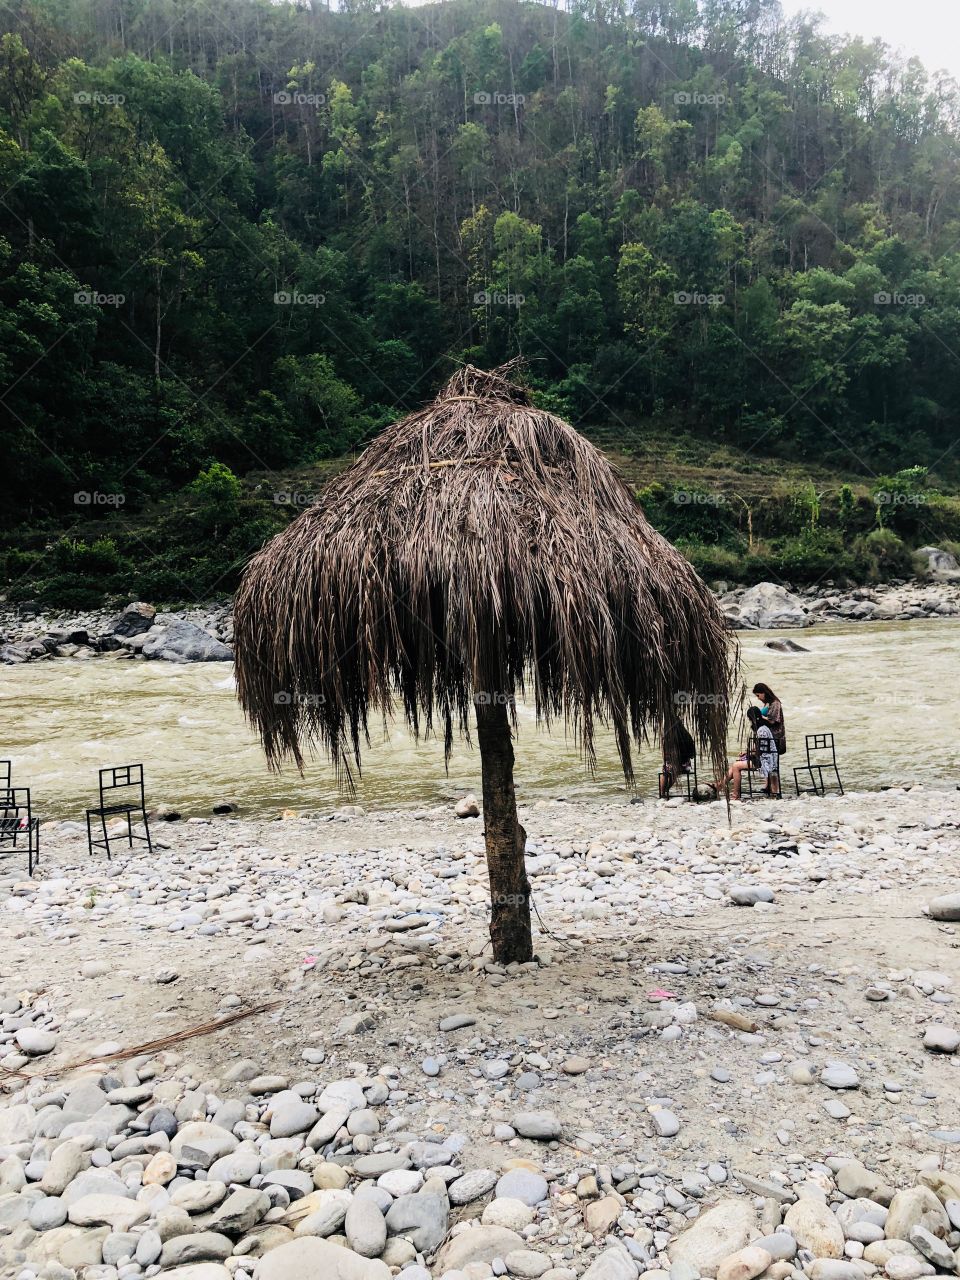 Palm shaped structure near flowing river.